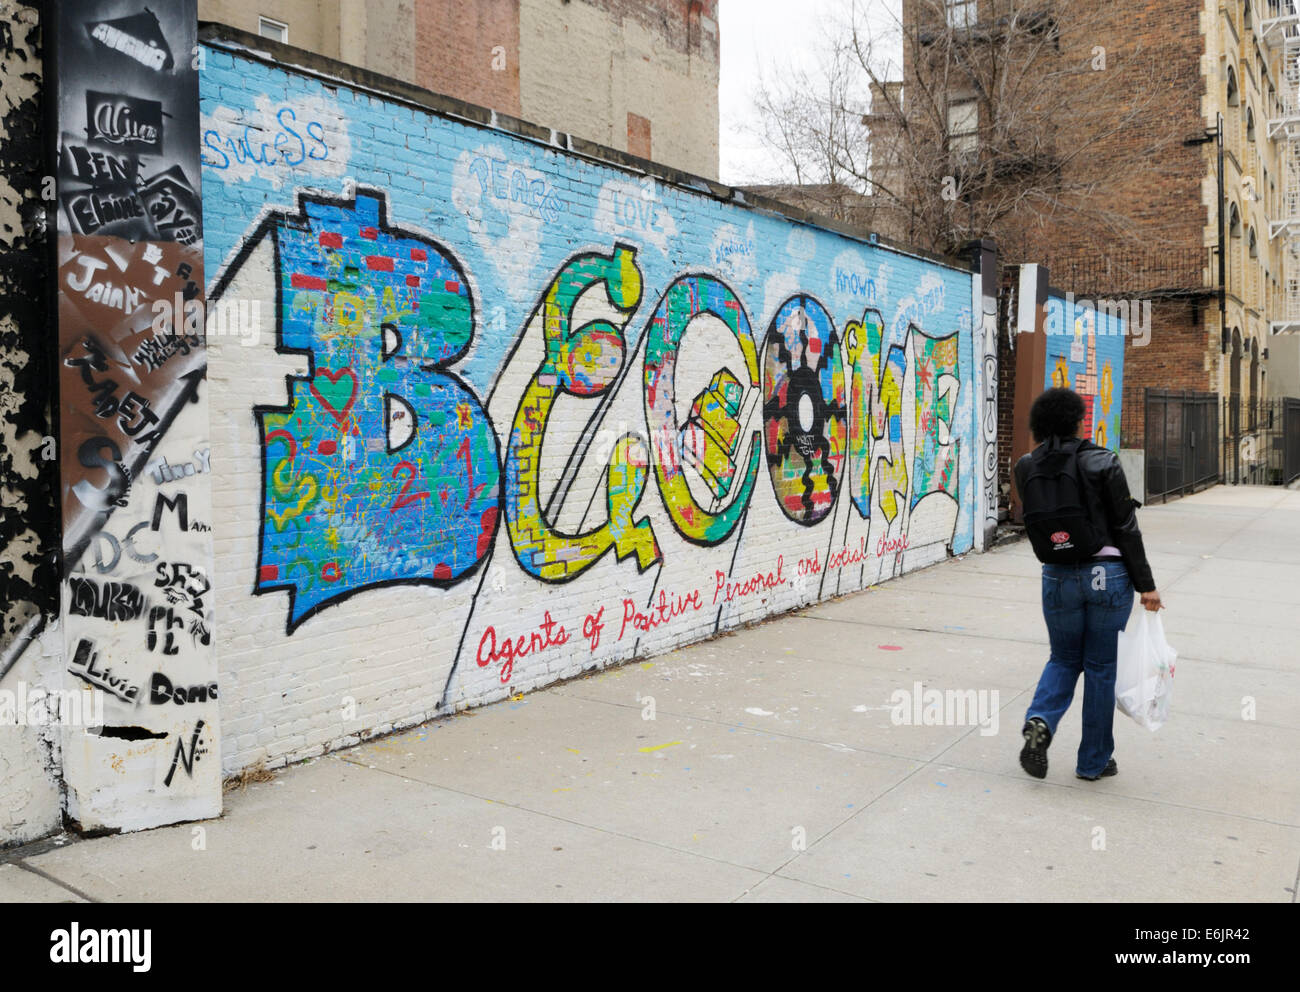 Painted wall encouraging local youth to study and develop themselves, Harlem, NYC Stock Photo